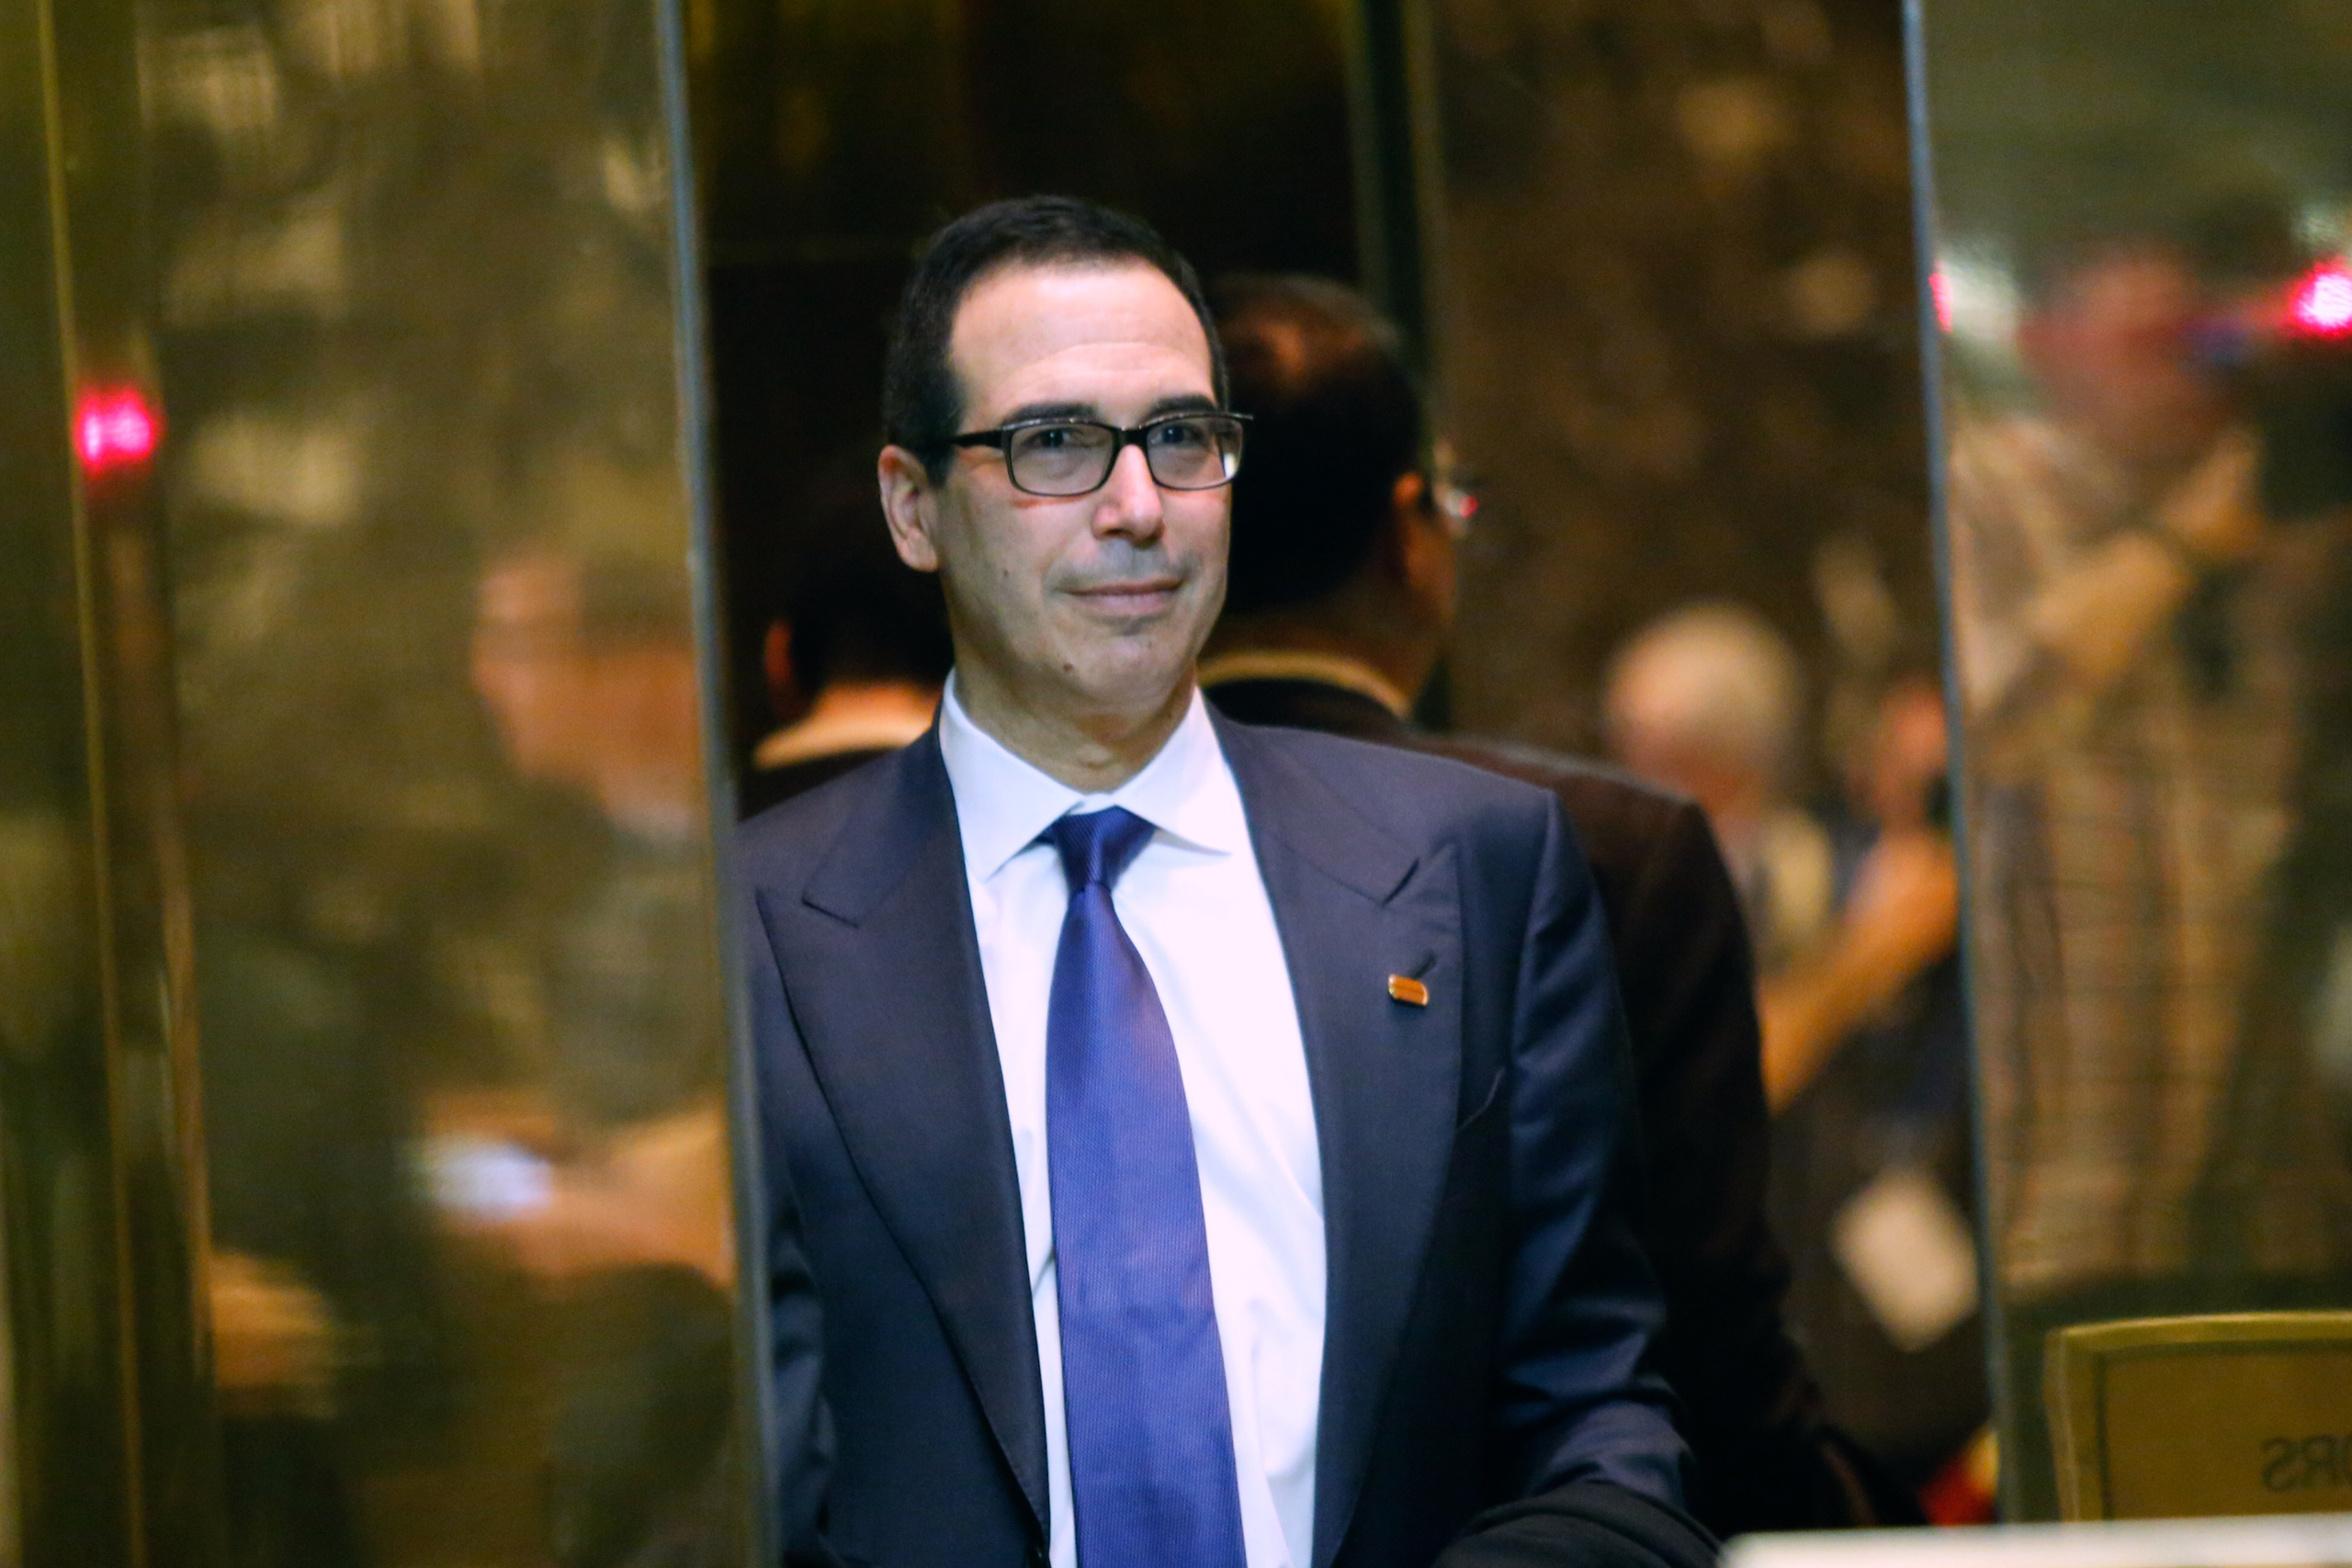 Advisor Steven Mnuchin arrives at the Trump Tower for meetings with US President-elect Donald Trump, in New York on Nov. 17, 2016. (Eduardo Munoz Alvarez—AFP/Getty Images)